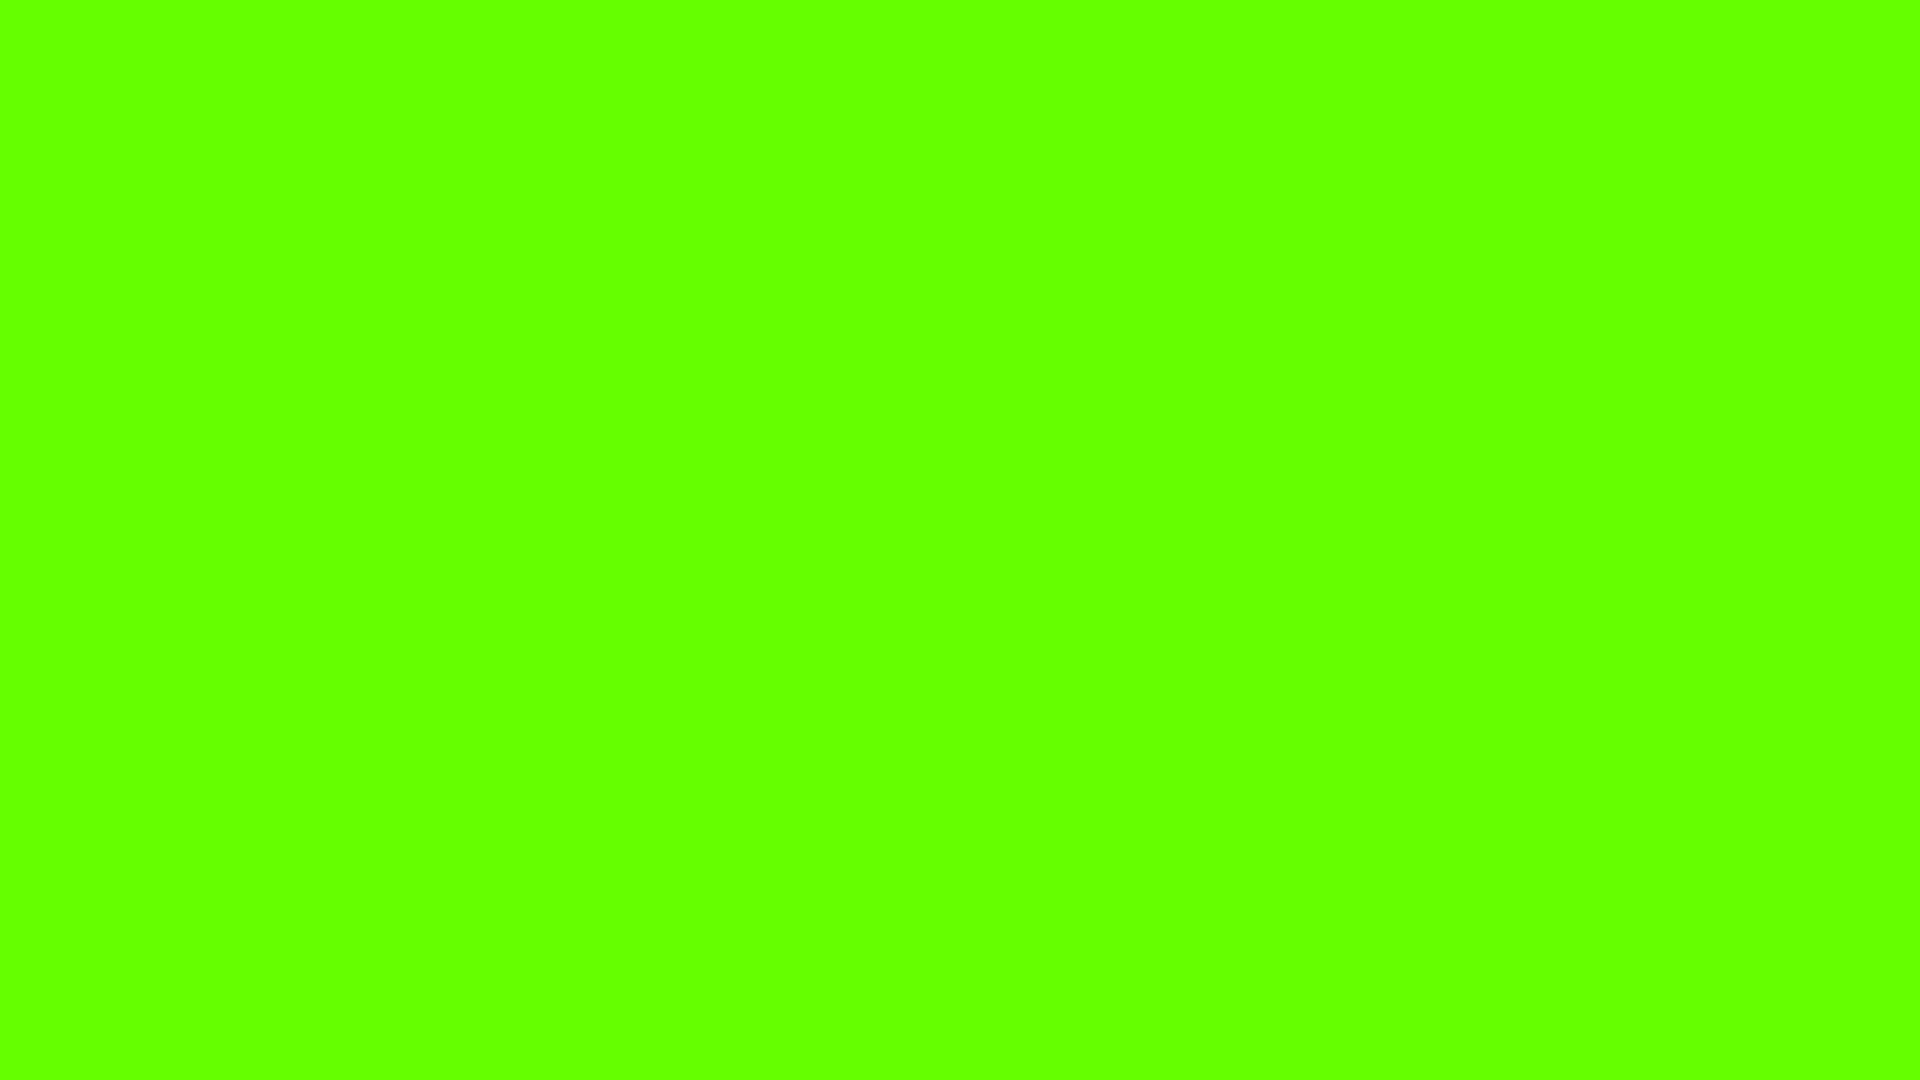 Solid Bright Green Background Image Pictures Becuo